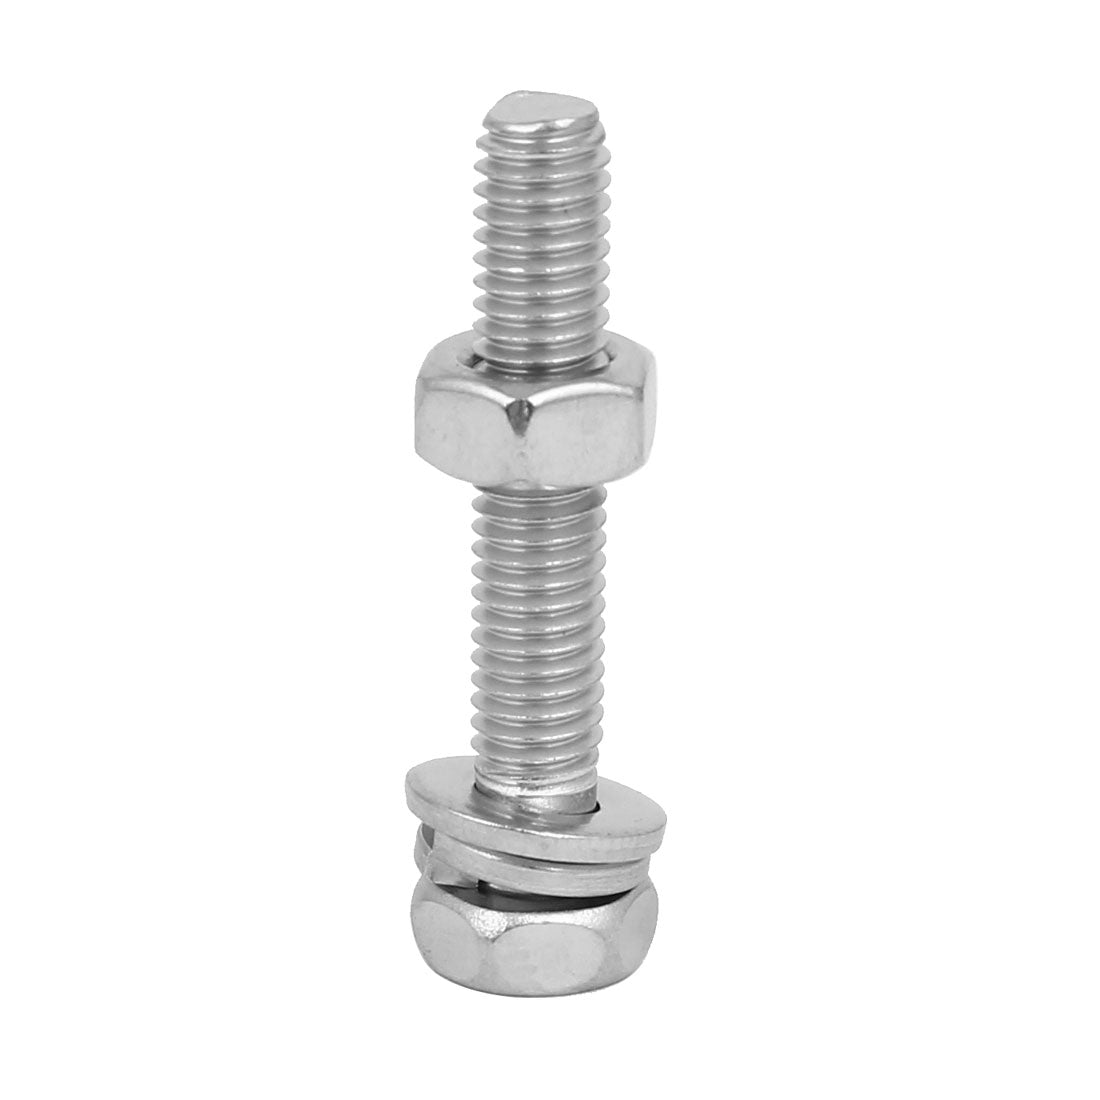 uxcell Uxcell M6 x 35mm 304 Stainless Steel Phillips Hex Head Bolts Nuts w Washers 6 Sets